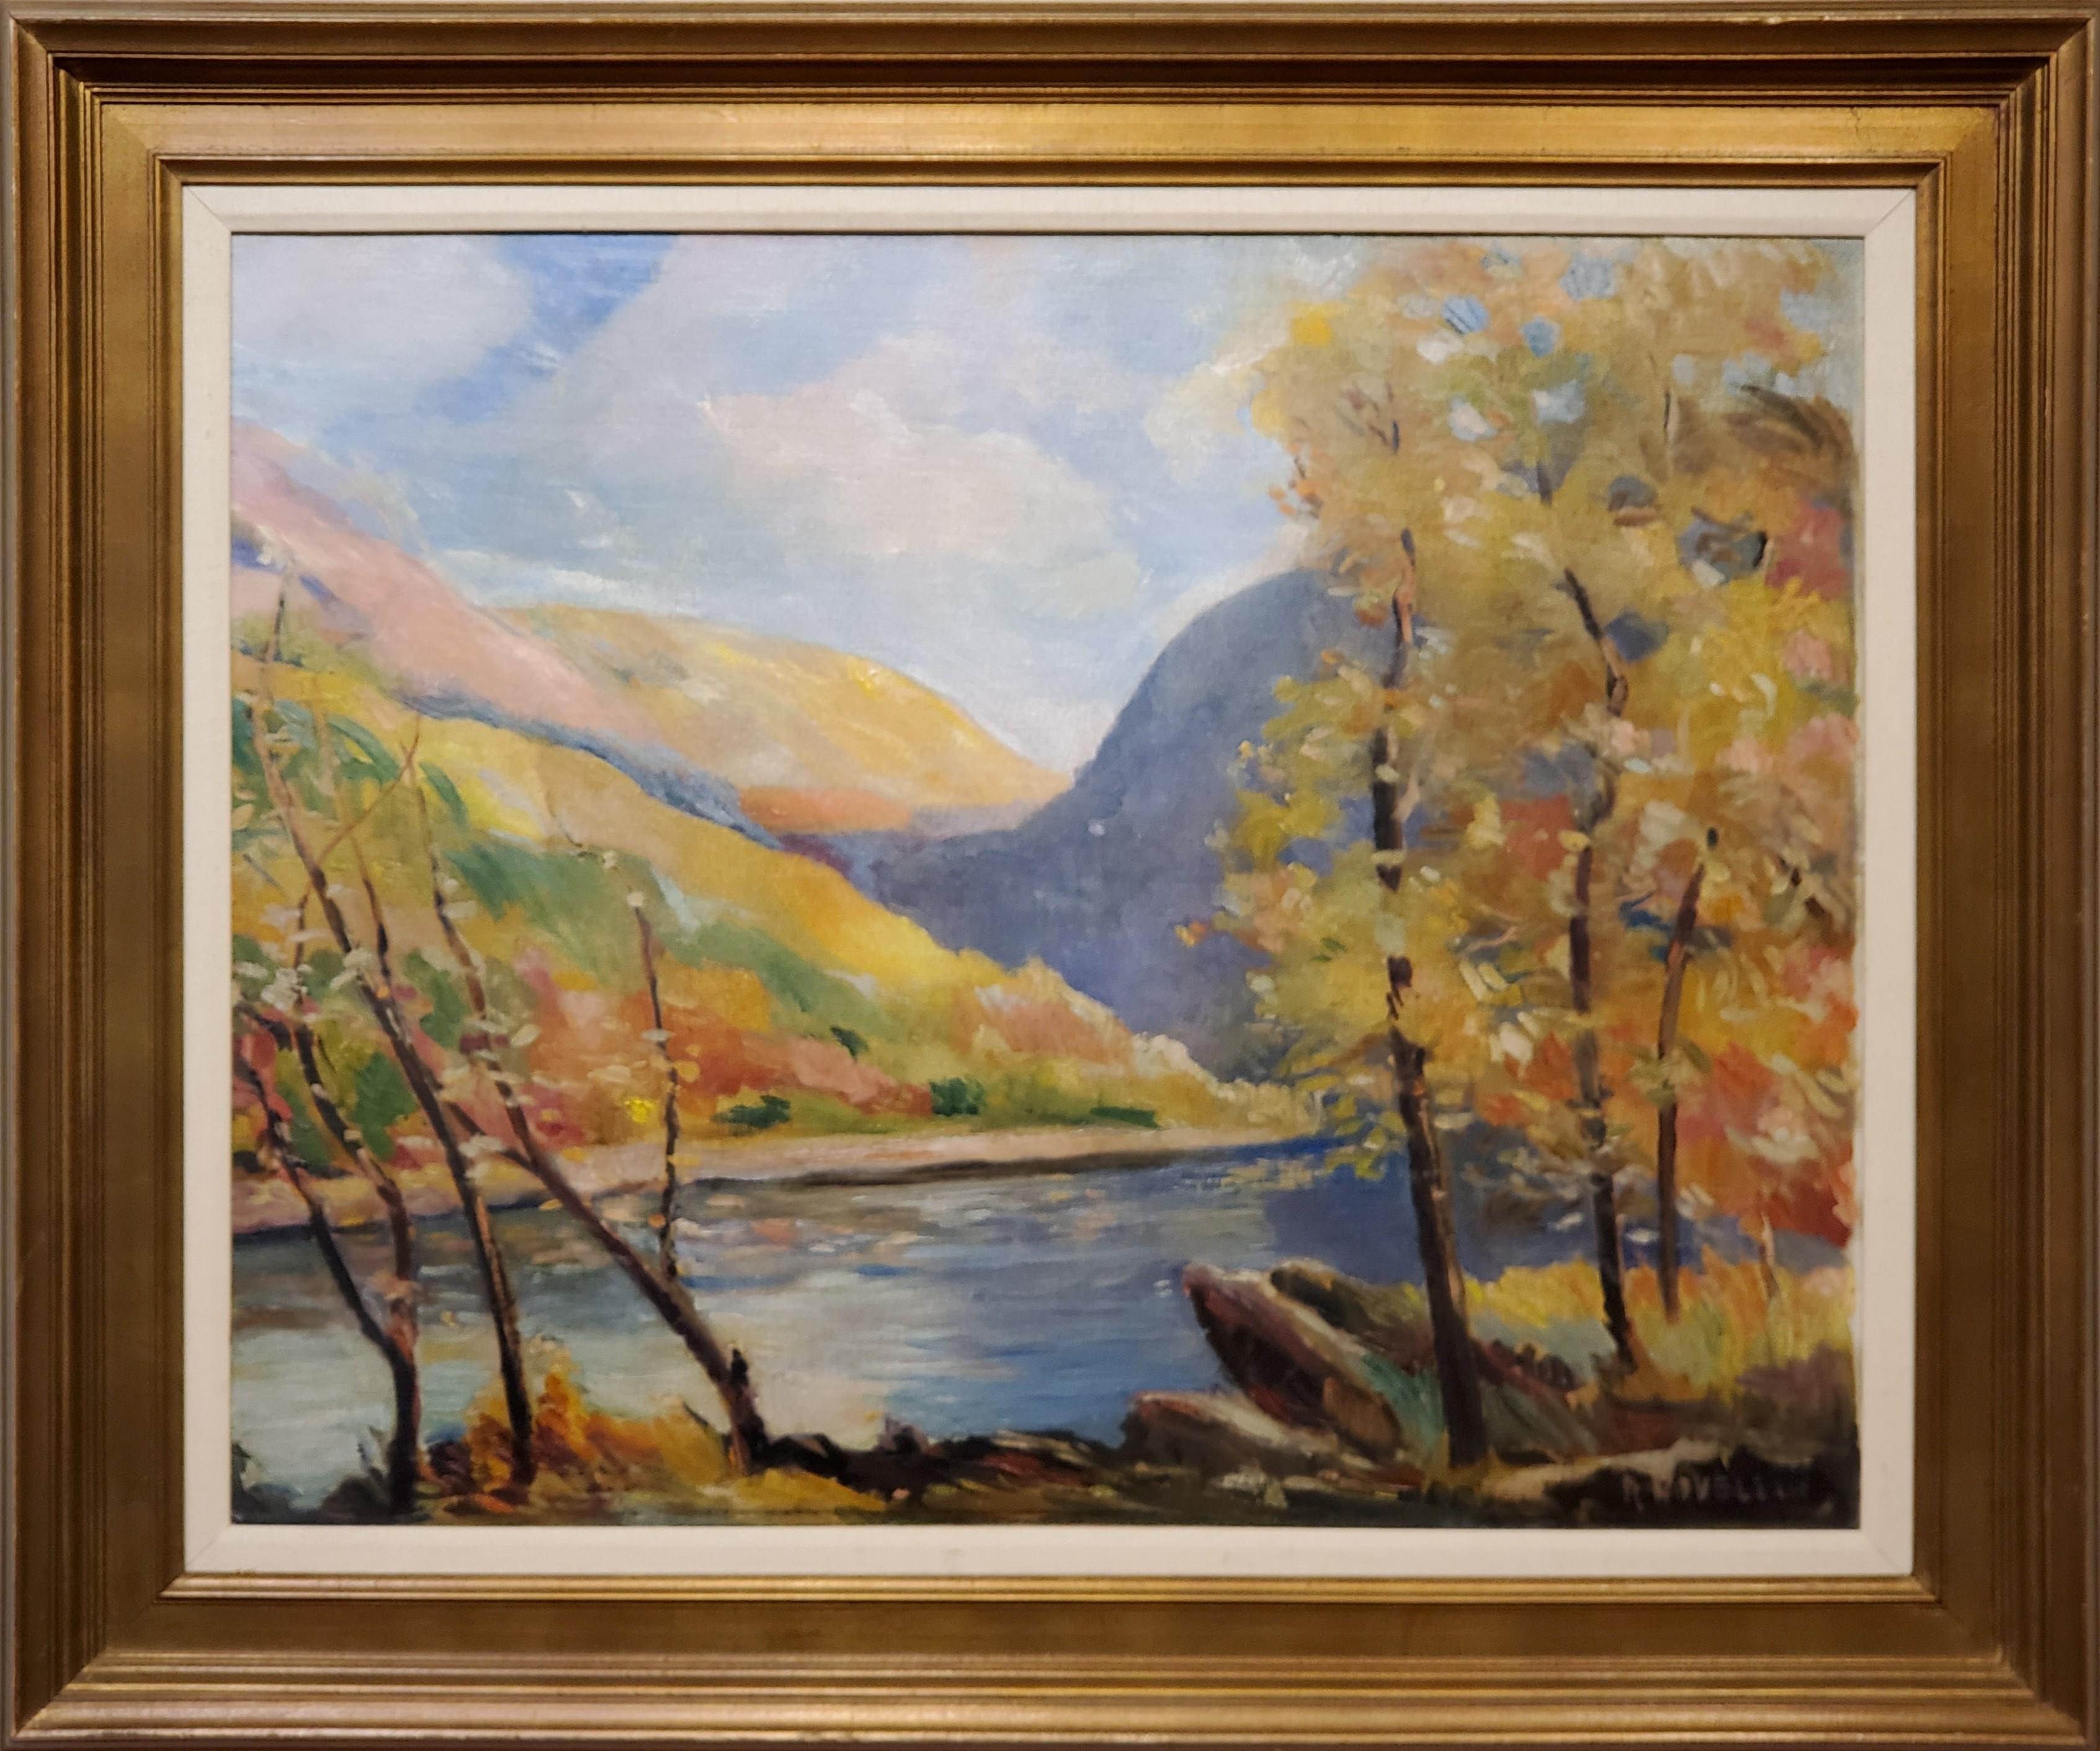 Rudolpho Novelli Landscape Painting - Impressionist Landscape View of the Delaware River Valley In Autumn